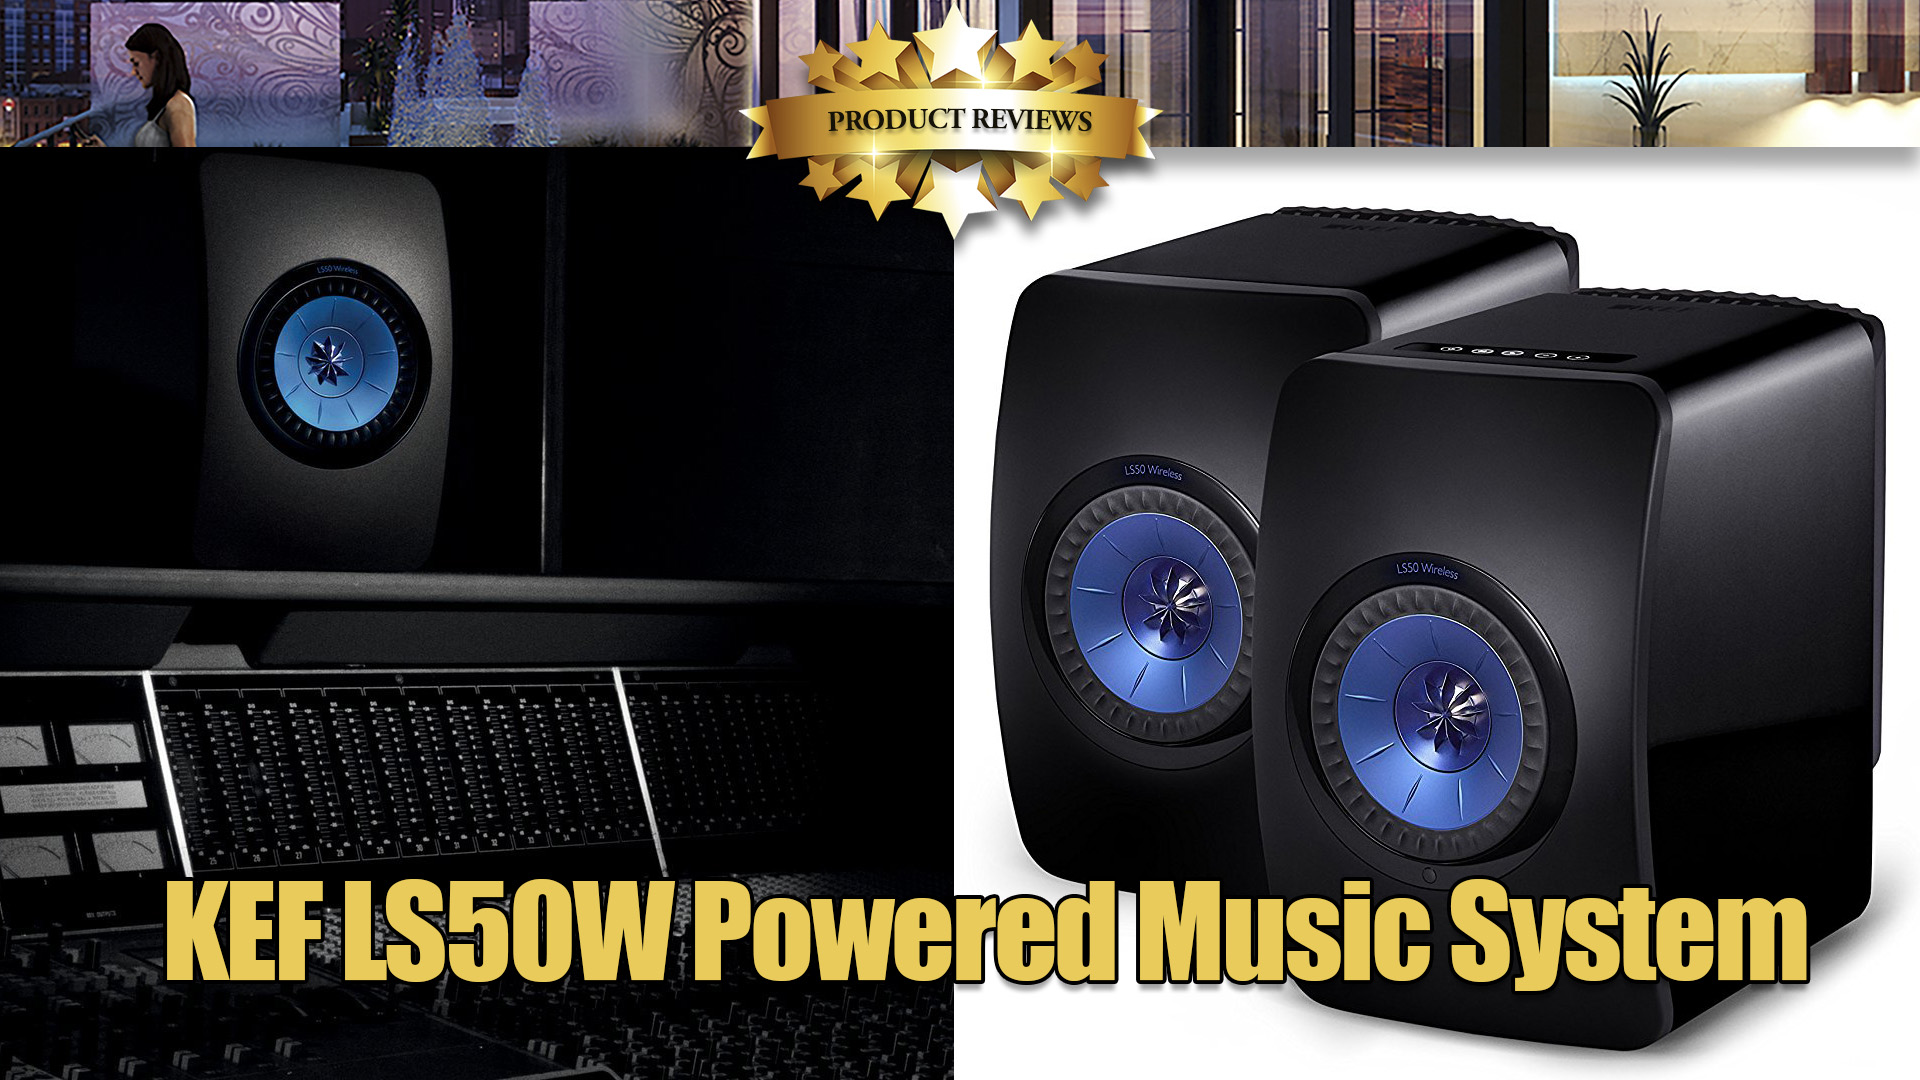 KEF LS50W Powered Music System